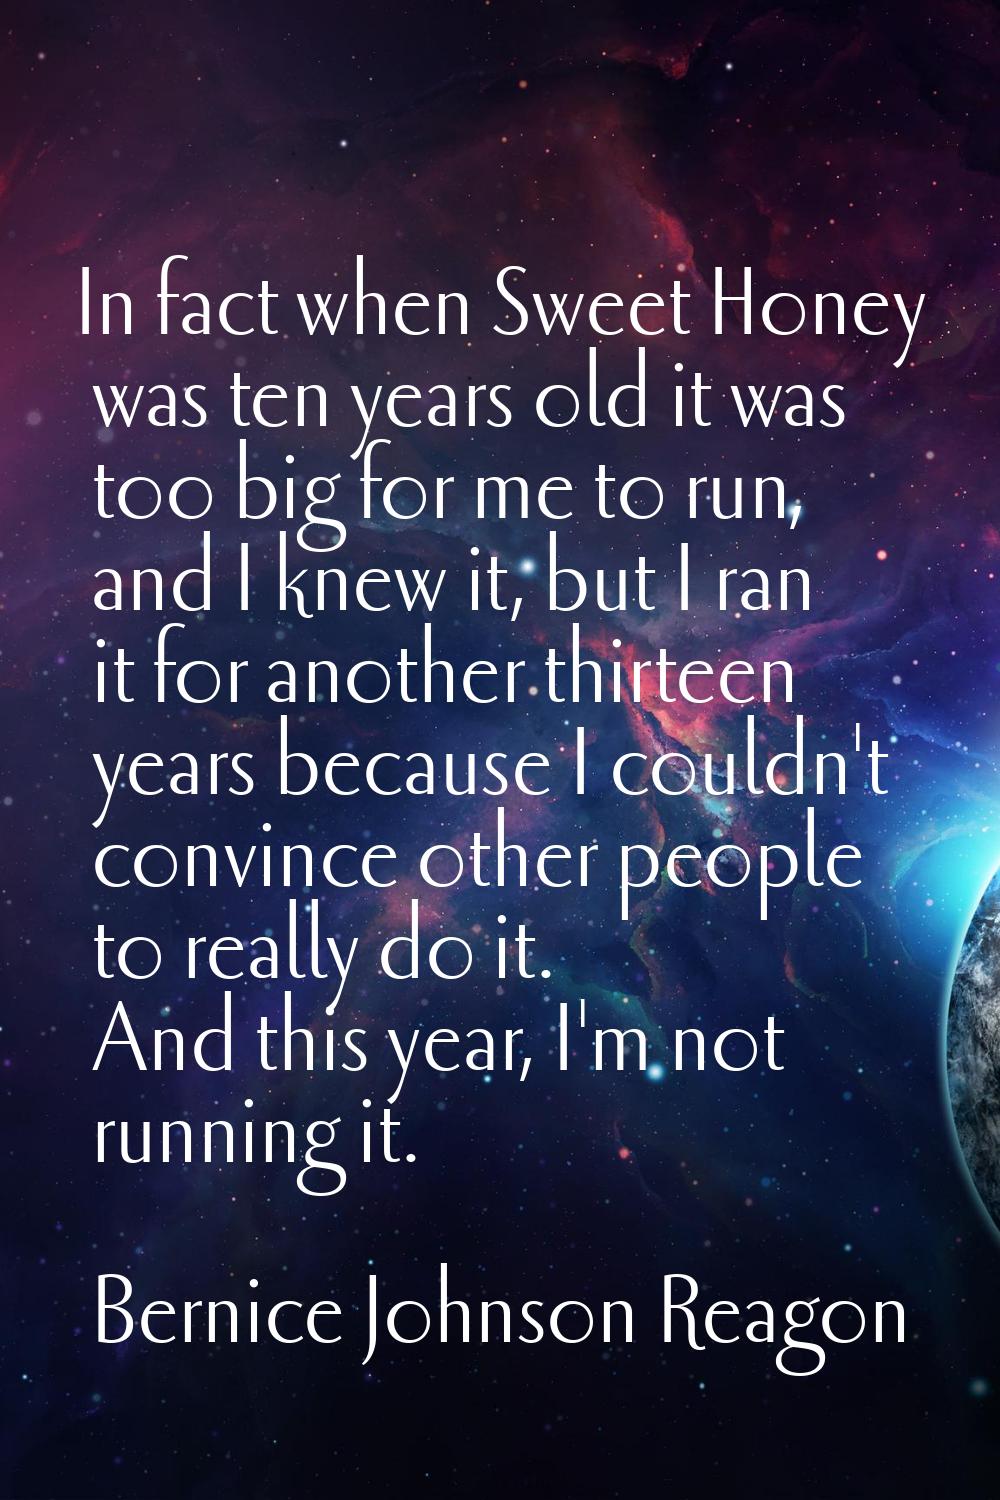 In fact when Sweet Honey was ten years old it was too big for me to run, and I knew it, but I ran i